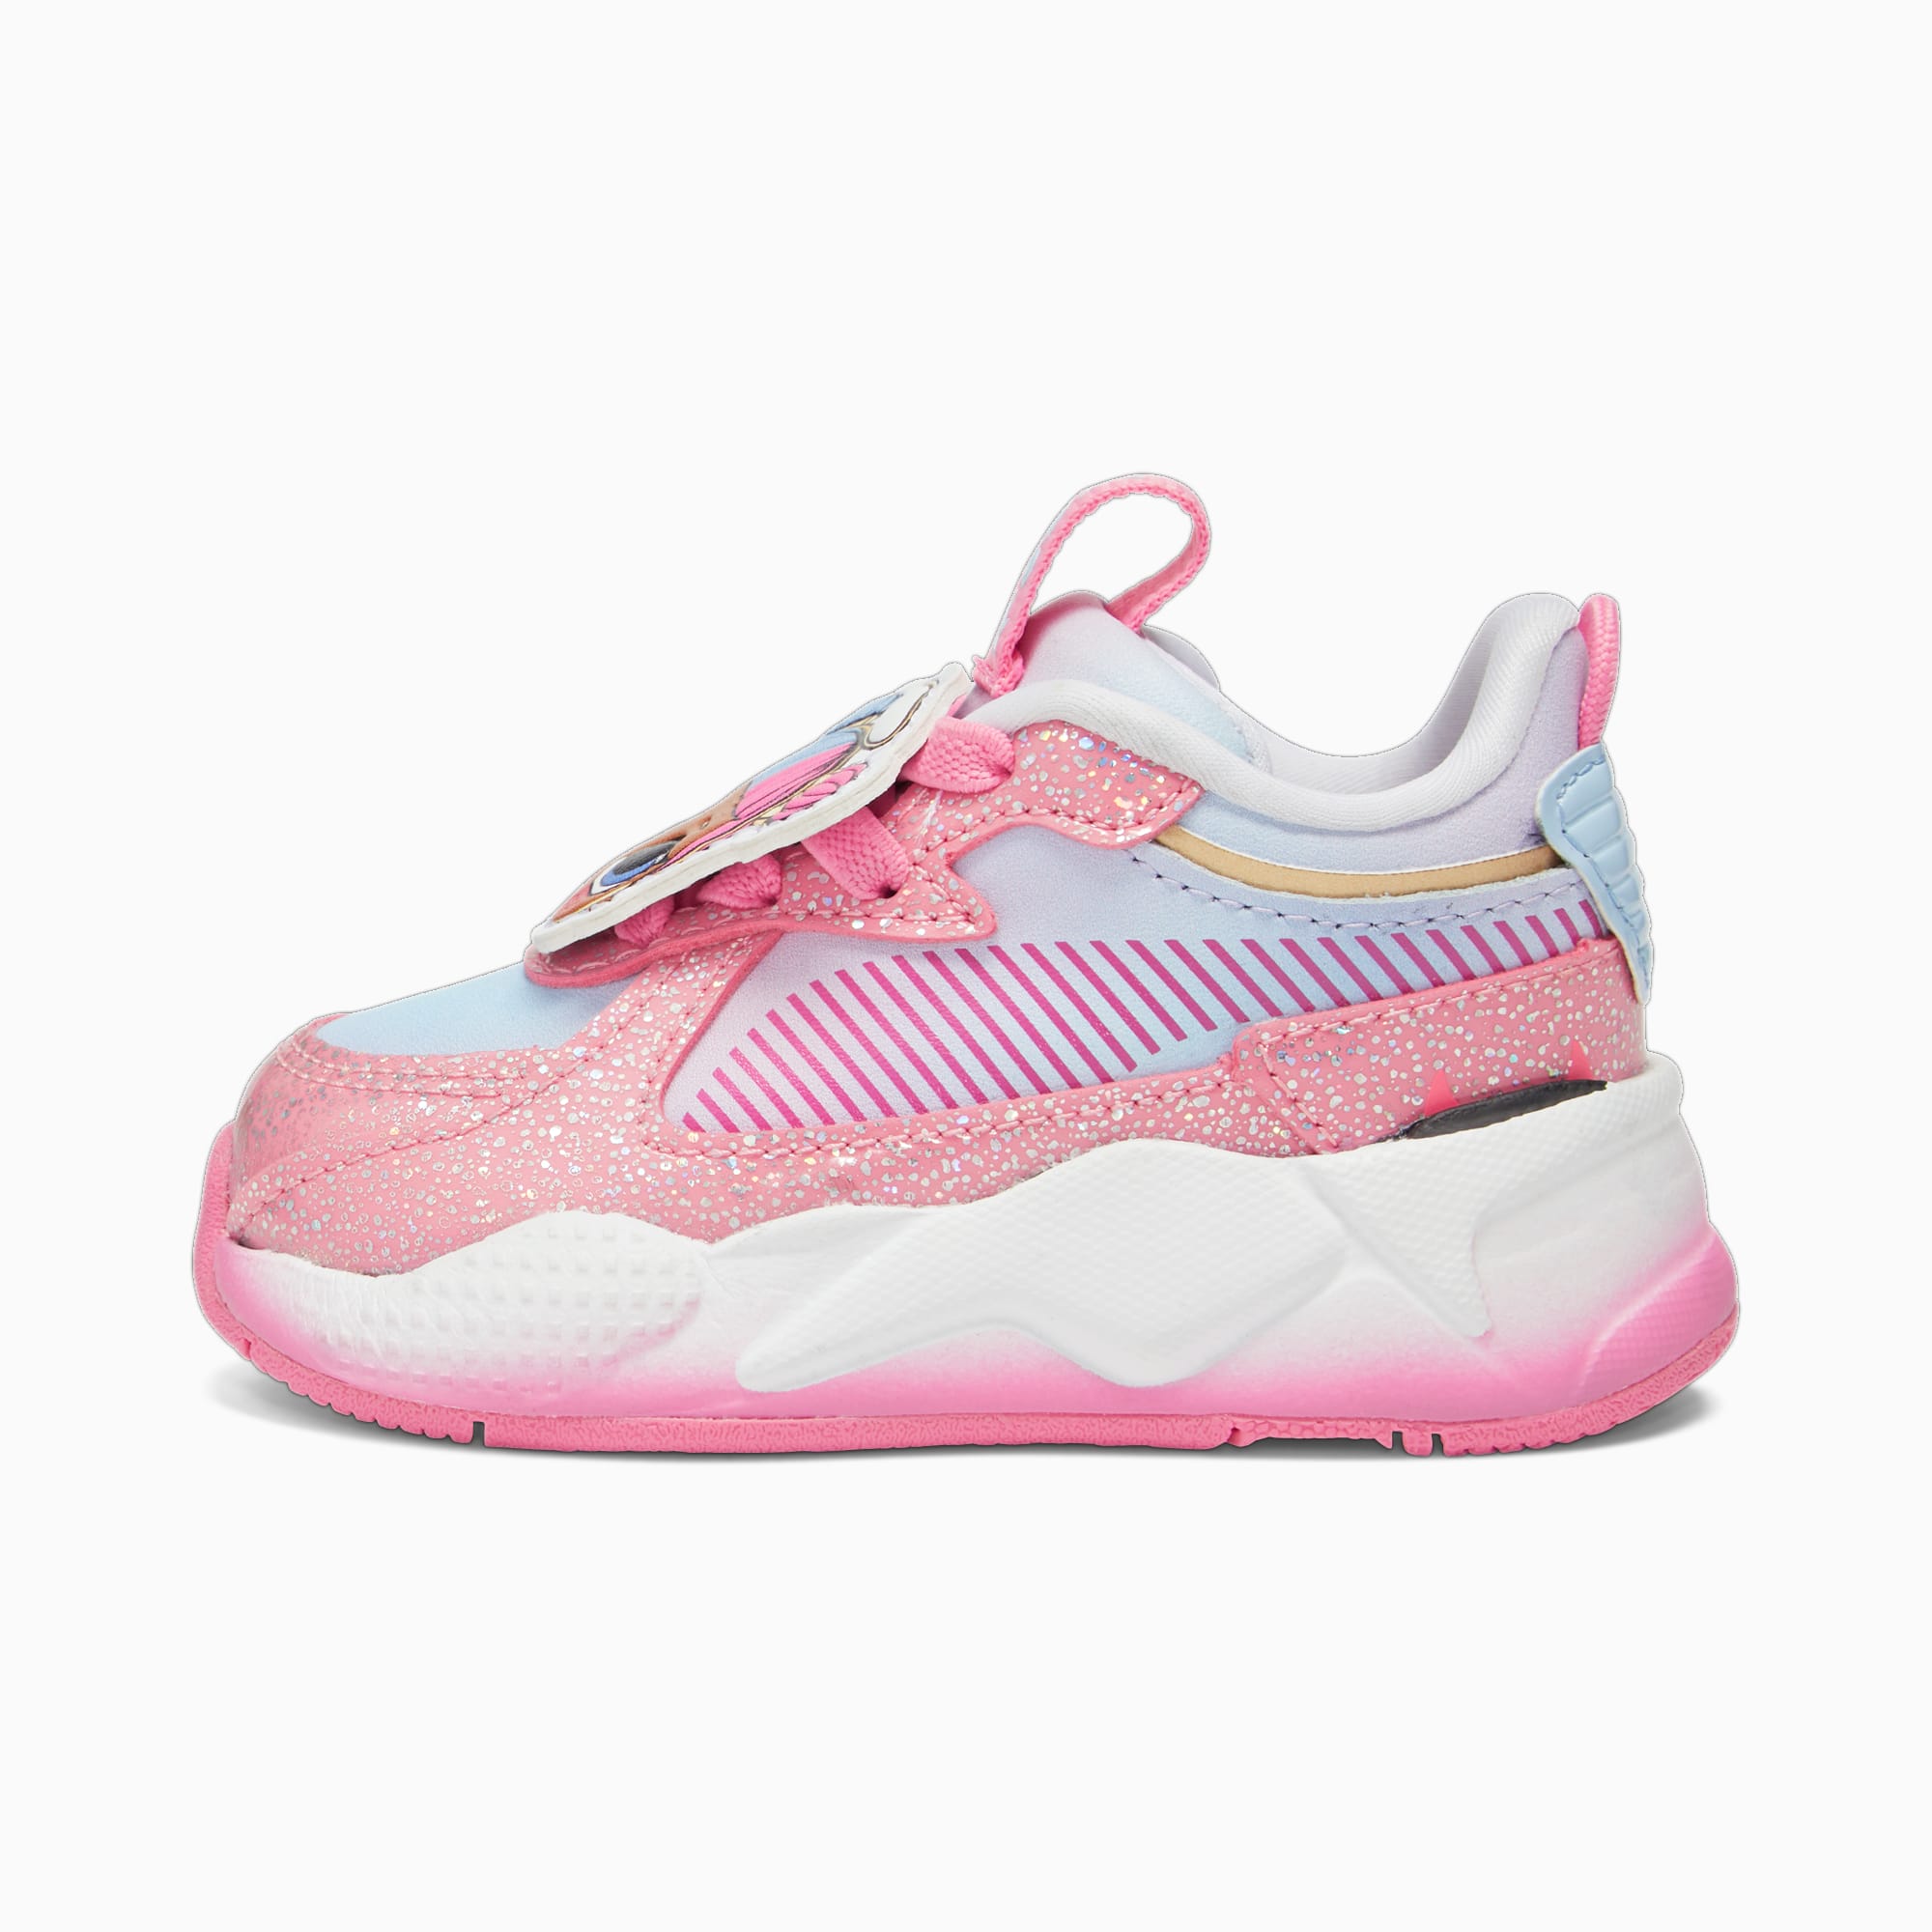 PUMA X Lol Surprise Rs-x Toddlers' Sneakers, Strawberry Burst/Silver Sky/White